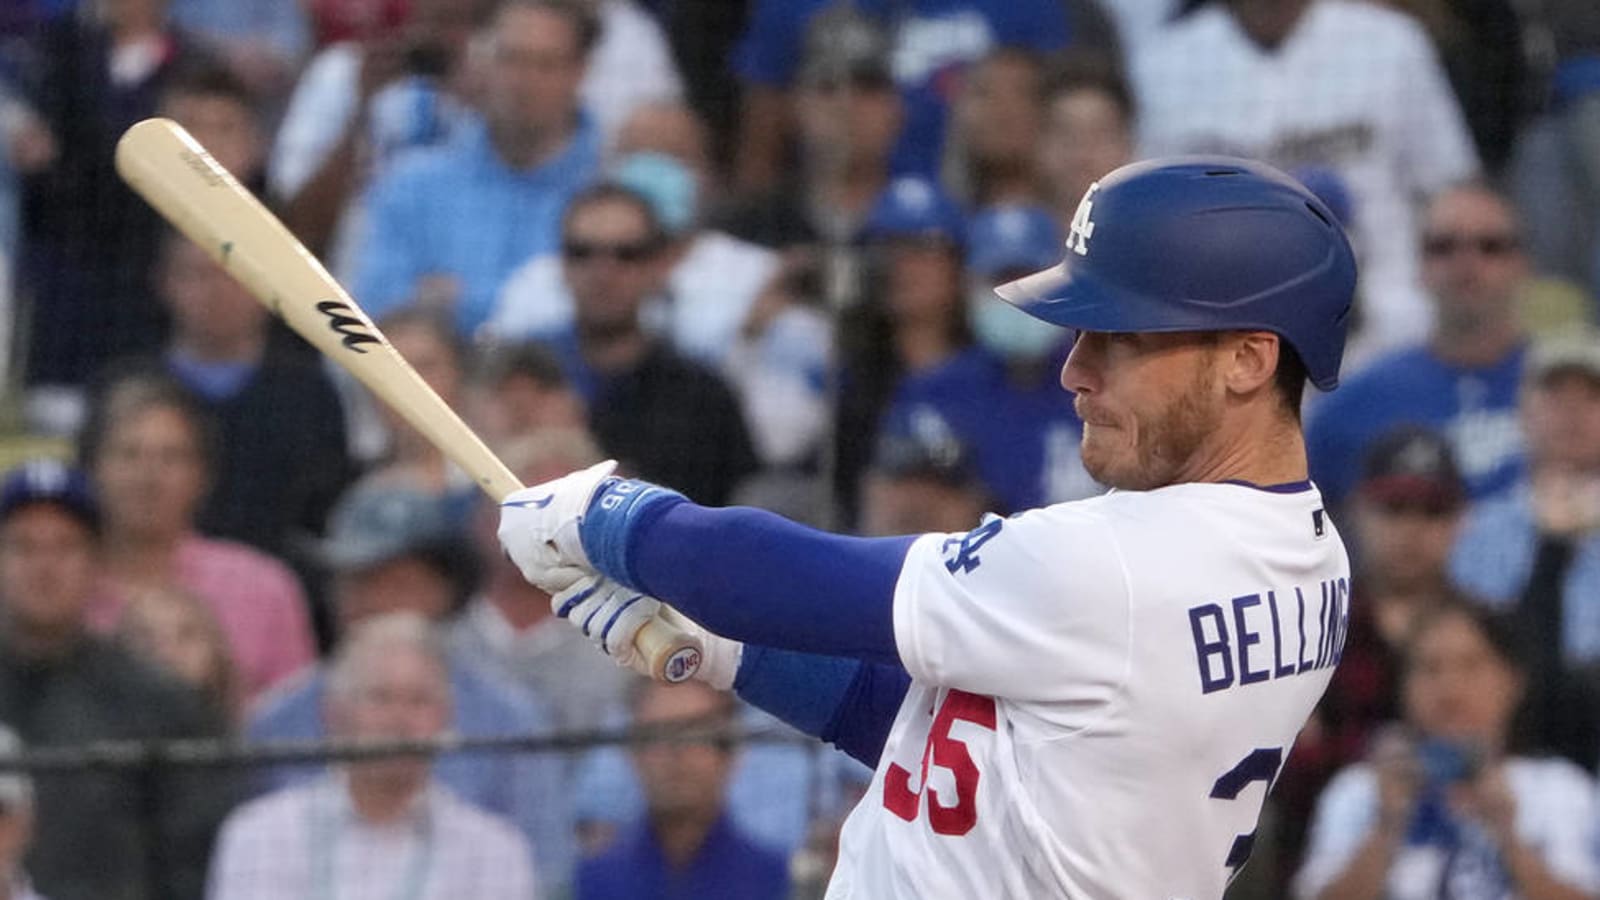 Bellinger's 3-run HR ties game as Dodgers rally to win Game 3